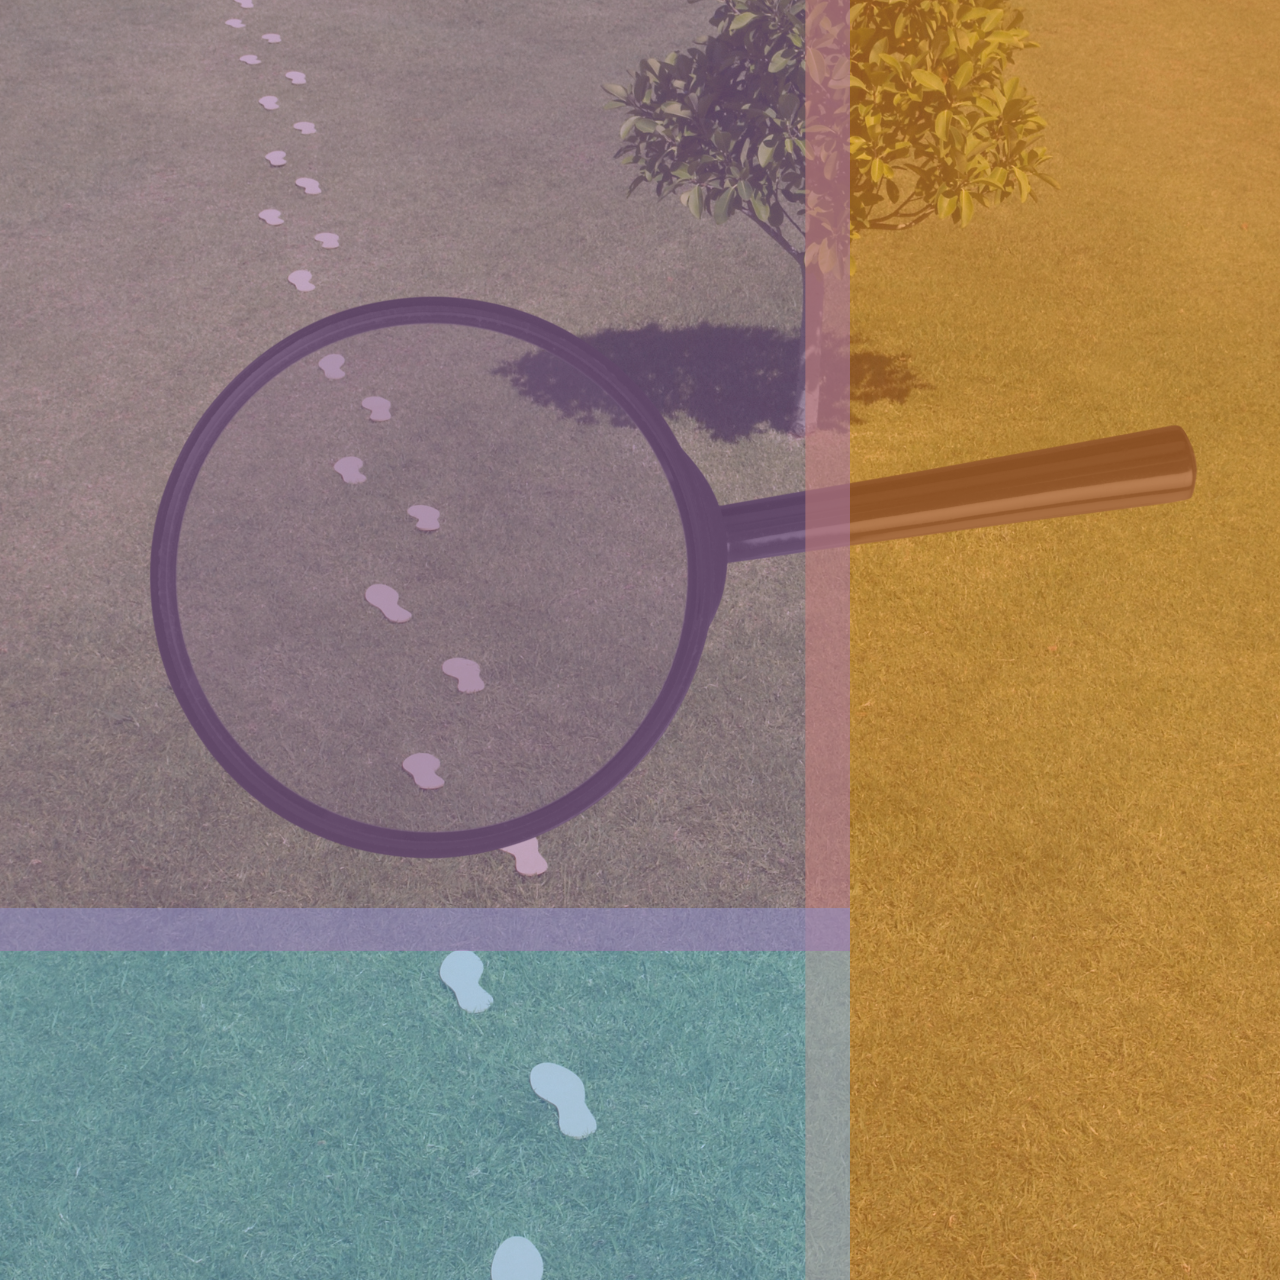 A magnifying glass and some footprints, overlaid with the library colors.